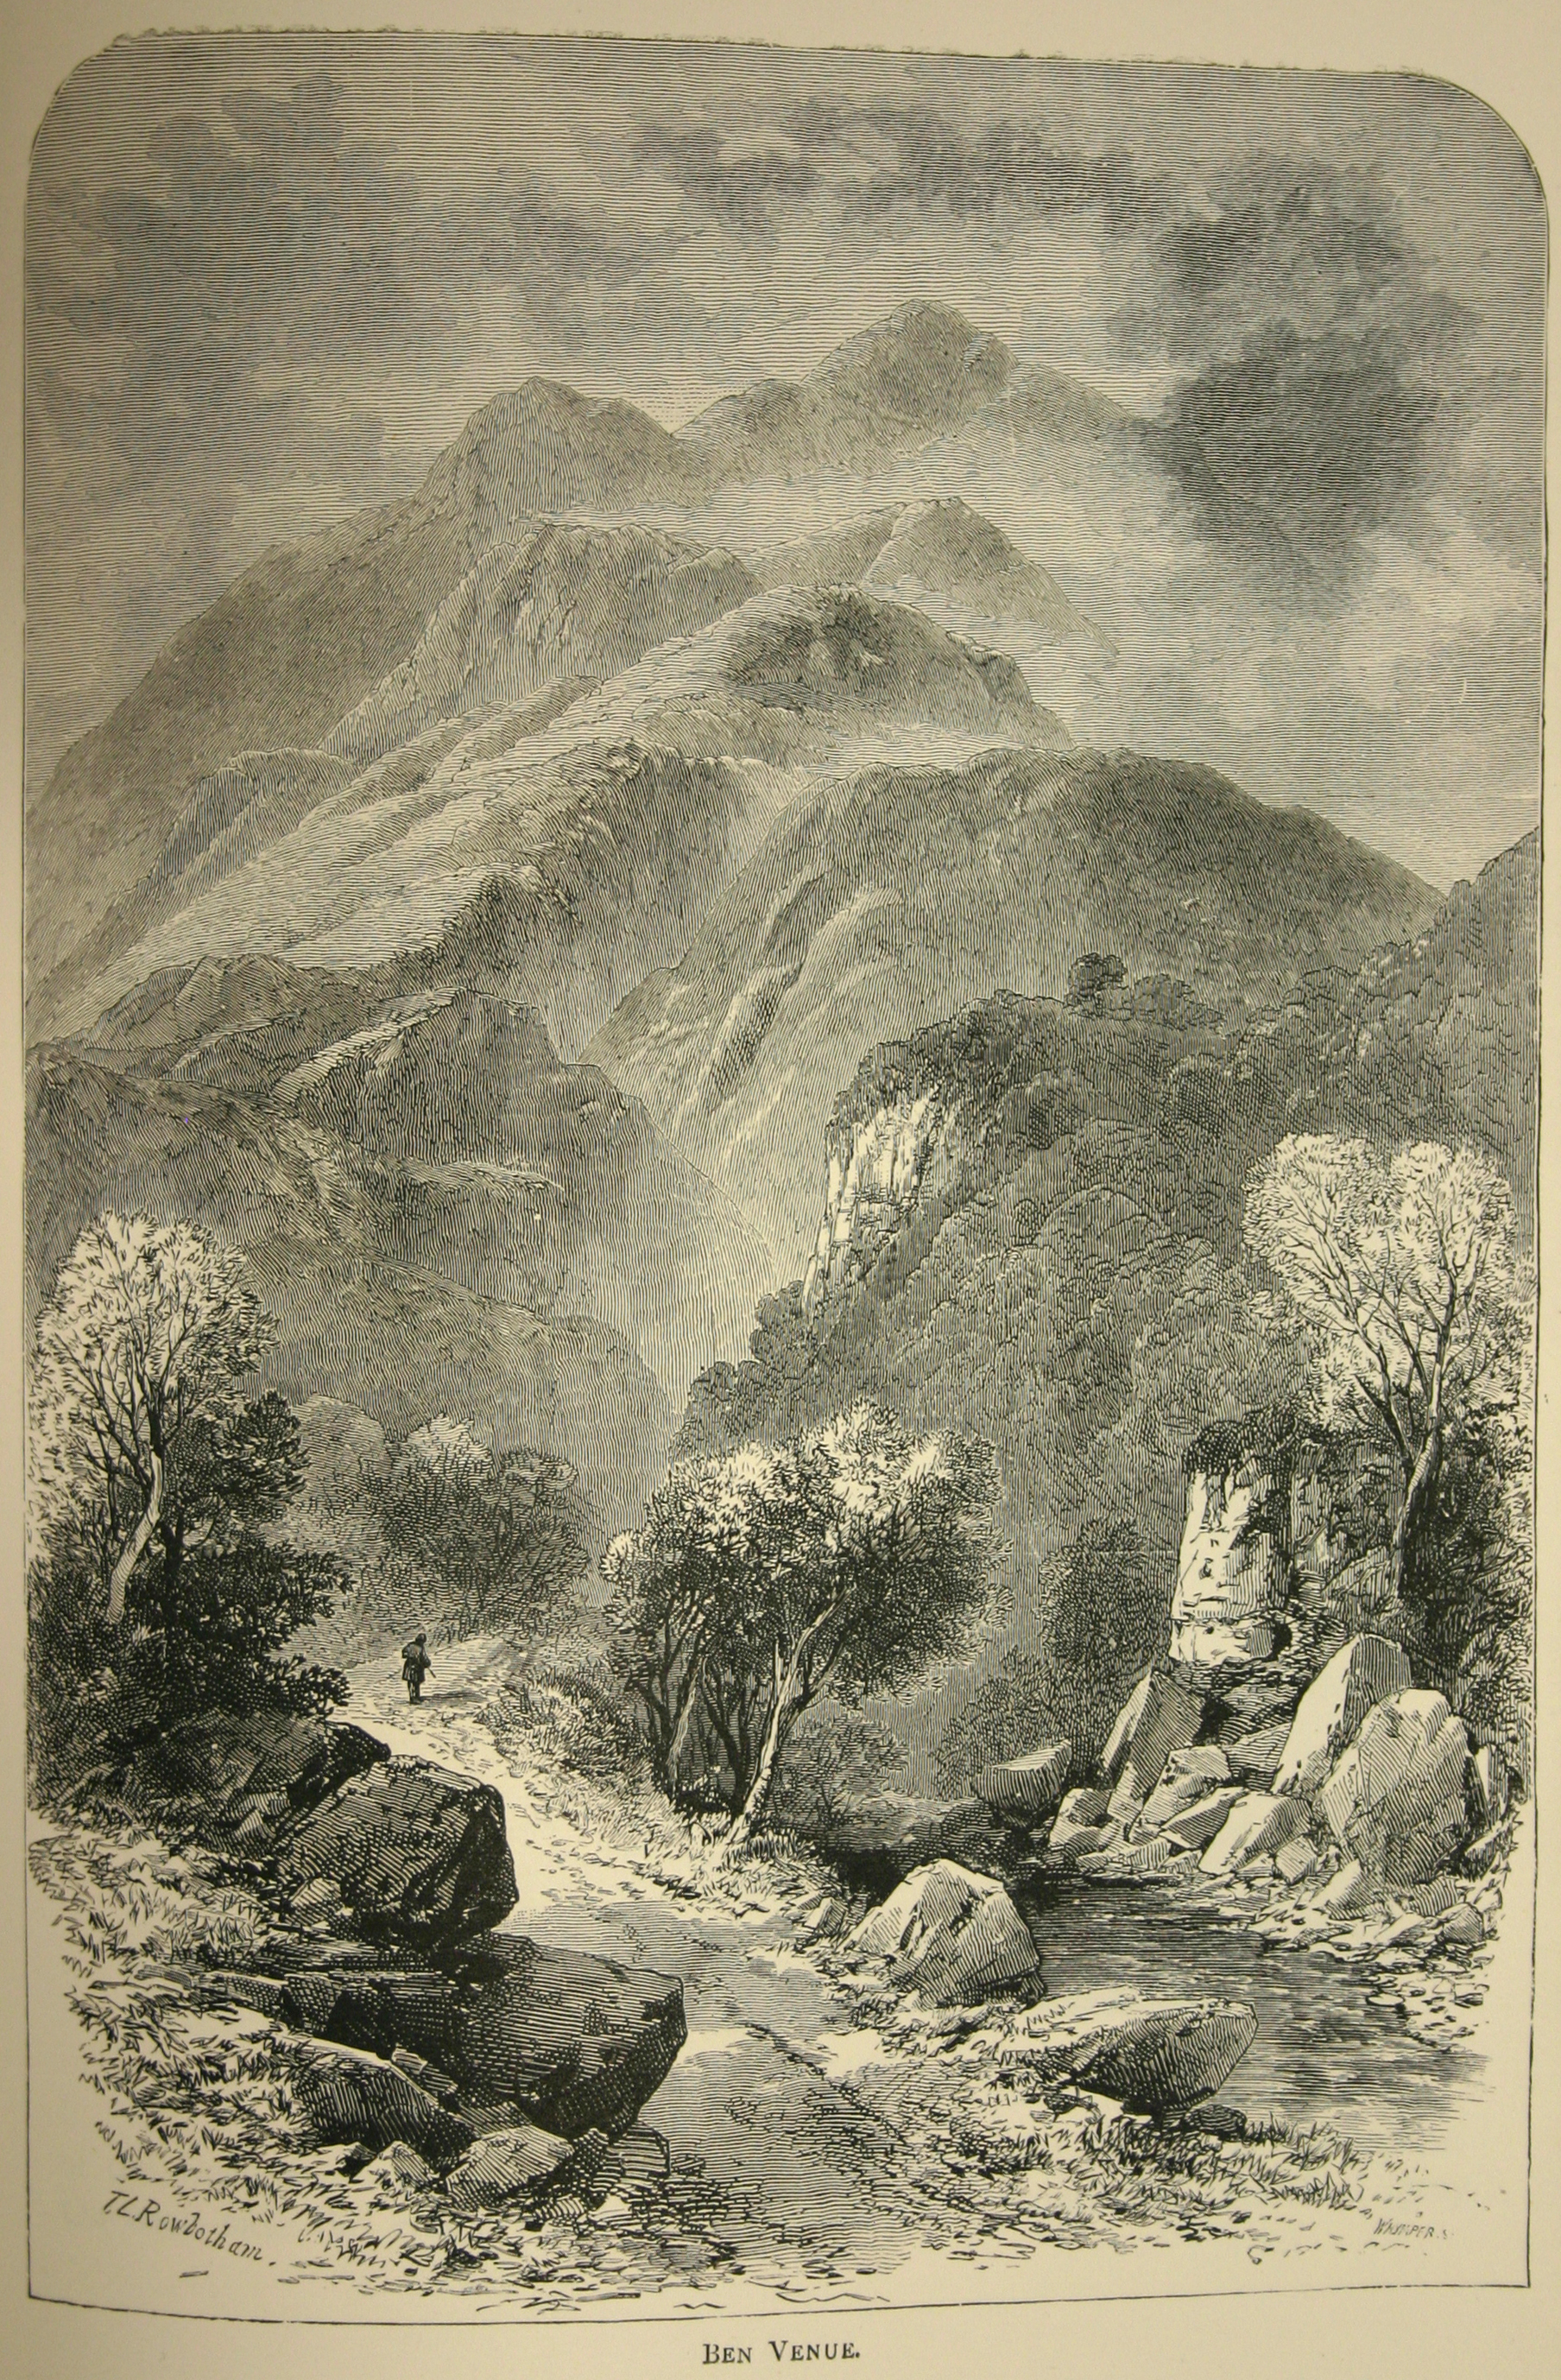 a sample of the archetypally romantic view of Scottish scenery, from Scottish pictures drawn with pen and pencil by Samuel G. Green (London, 1886) sDA865.G8)